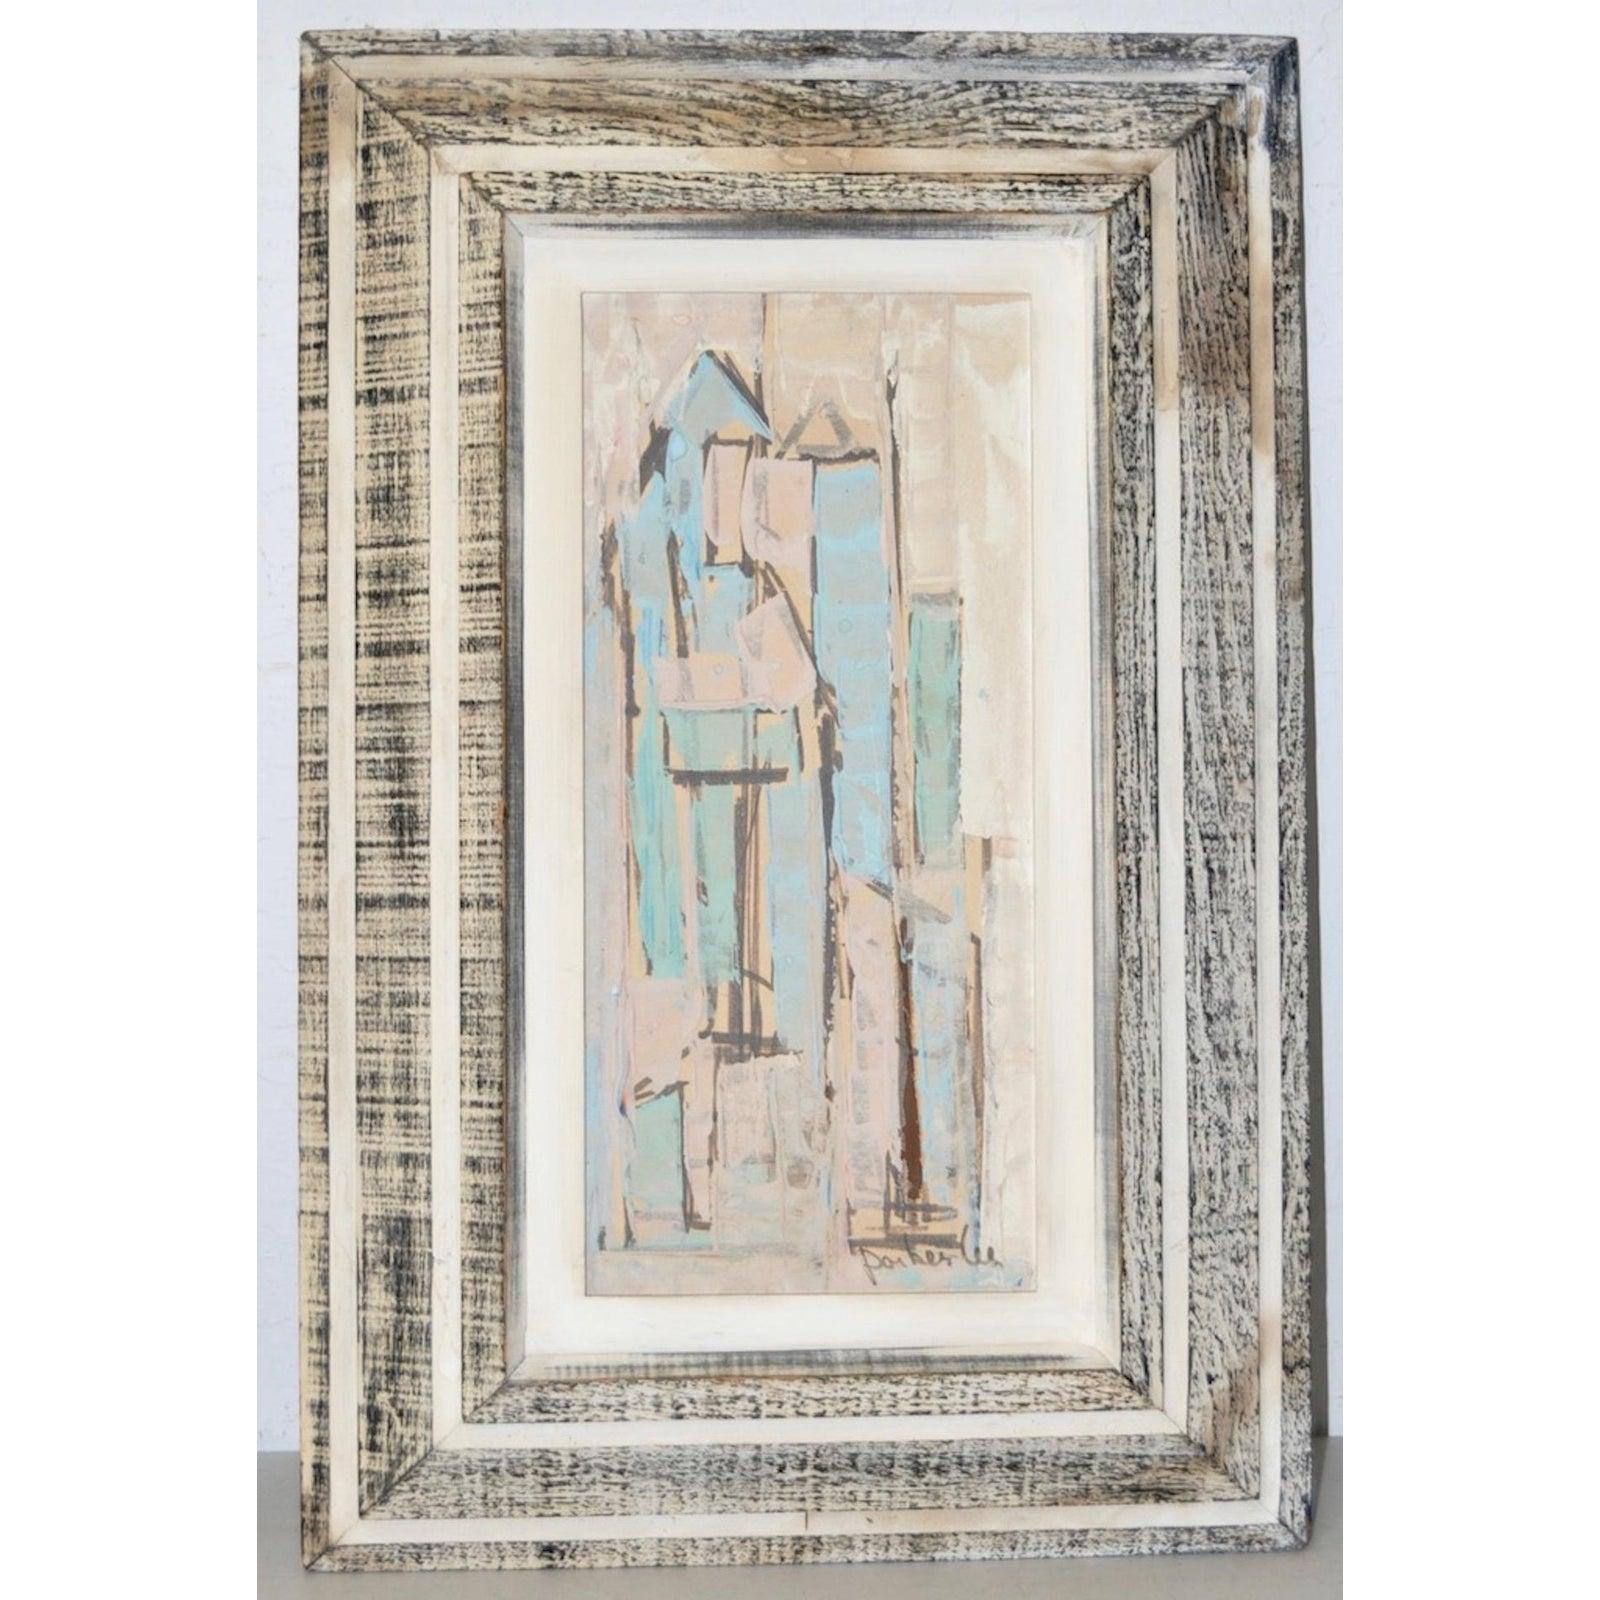 Matching Pair of Parker Lee Mid Century Modern Abstract Gouache c.1950s

With subtle color and texture, these fantastic mid century paintings show a pair of abstract cityscapes, one with tall buildings, the other with high wires criss-crossing above